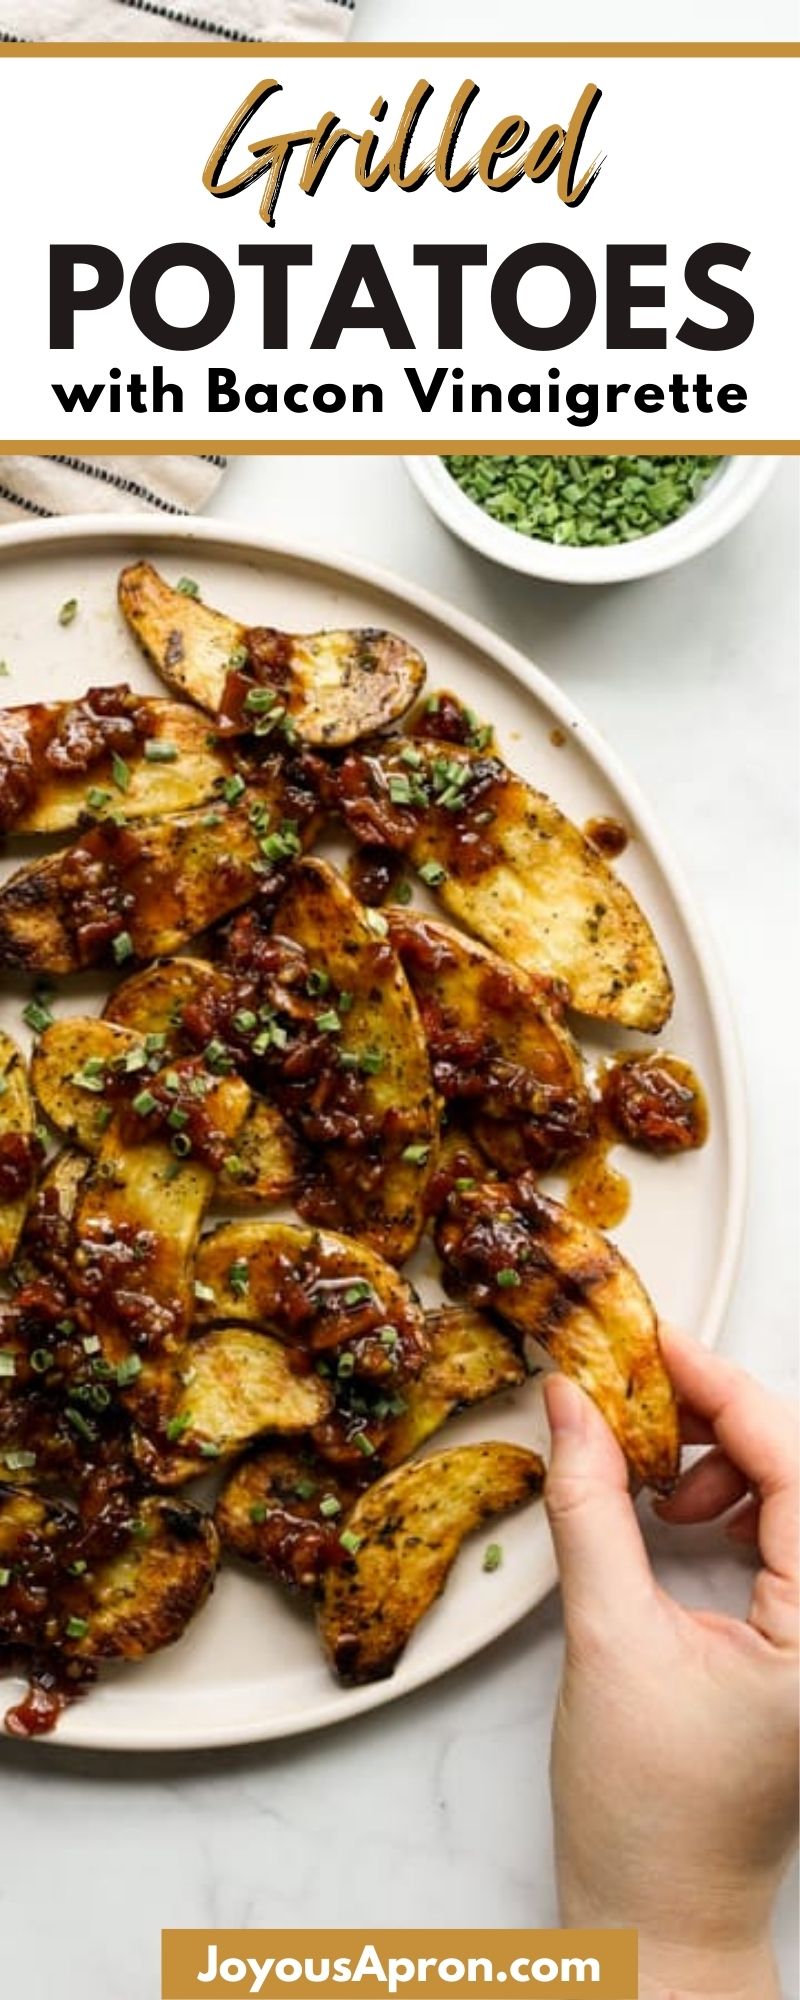 Grilled Fingerling Potatoes with Bacon Vinaigrette - delicious potato side dish for summer grilling! Fingerling potatoes are seasoned and grilled to perfection, then drizzled with tangy, savory and sweet homemade Bacon Vinaigrette. via @joyousapron